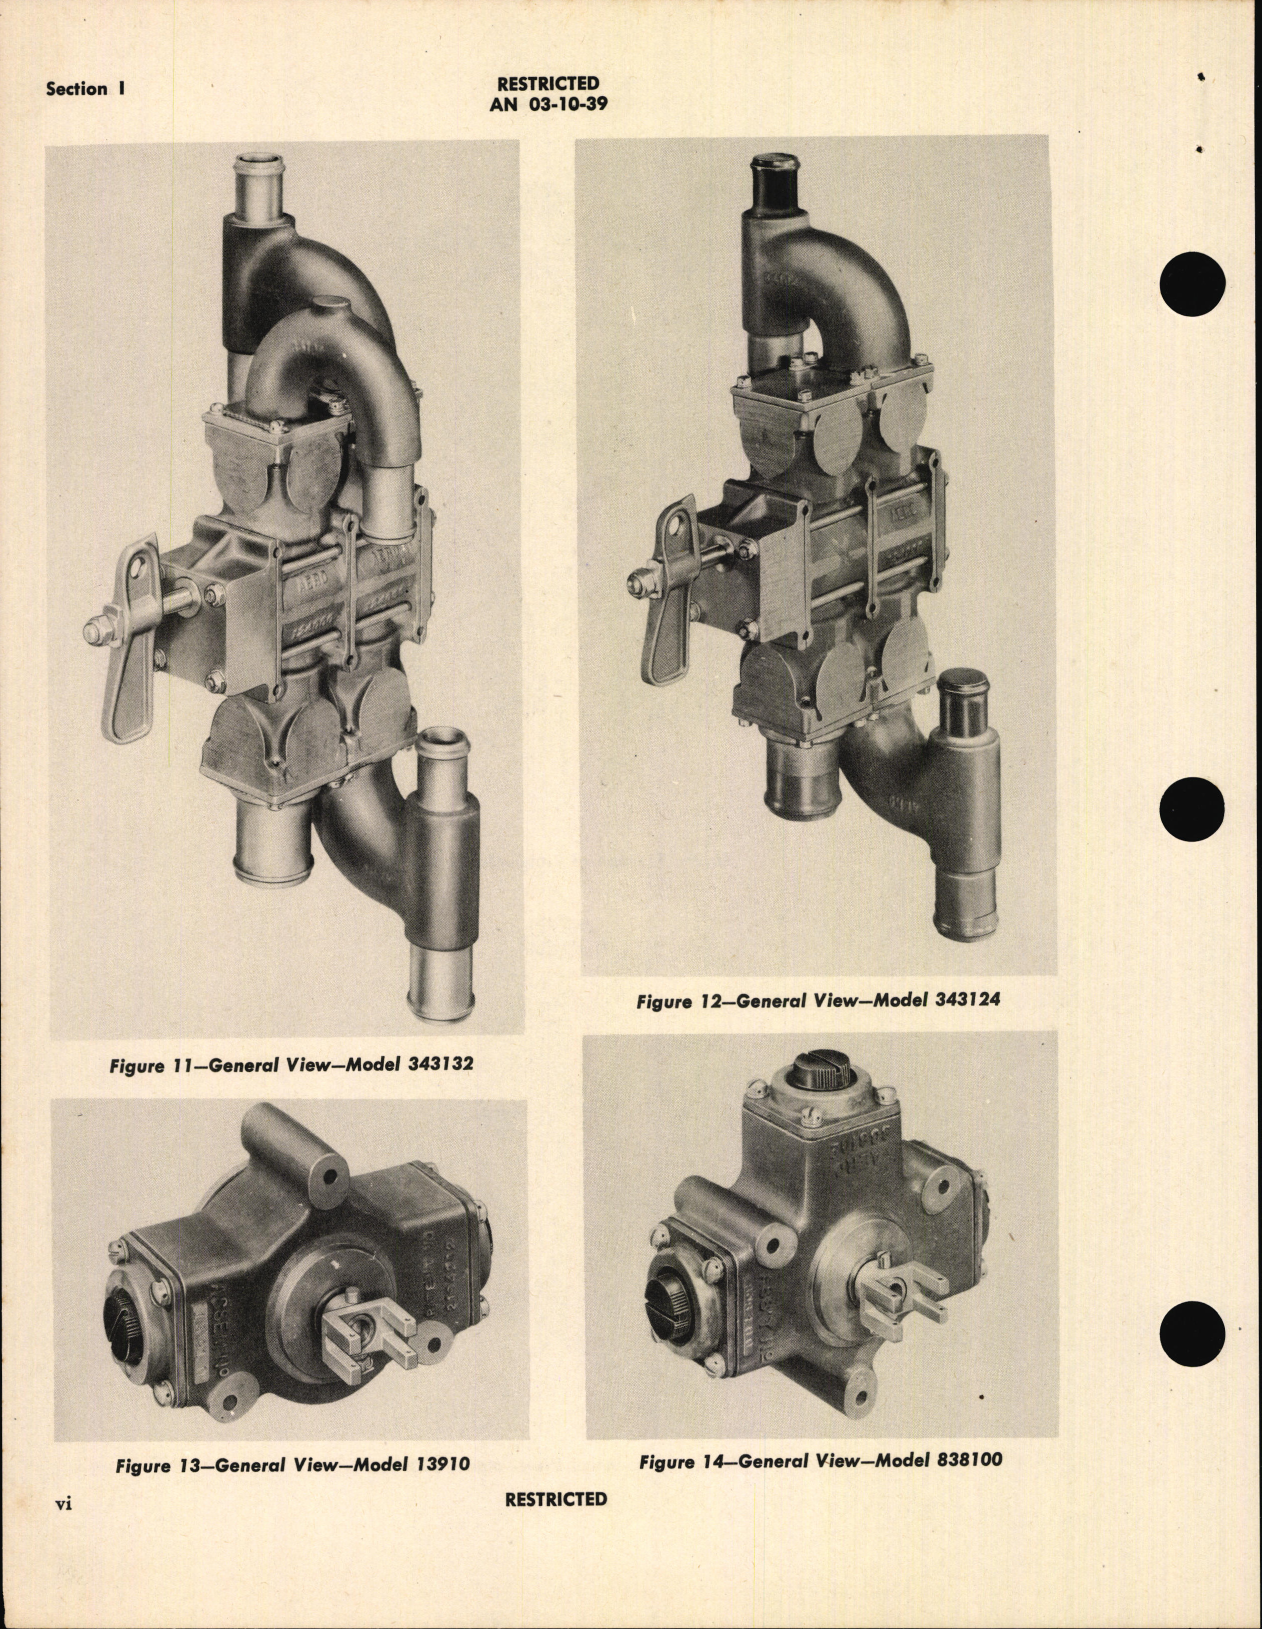 Sample page 8 from AirCorps Library document: Handbook of Instructions with Parts Catalog for Fuel Selector Valves